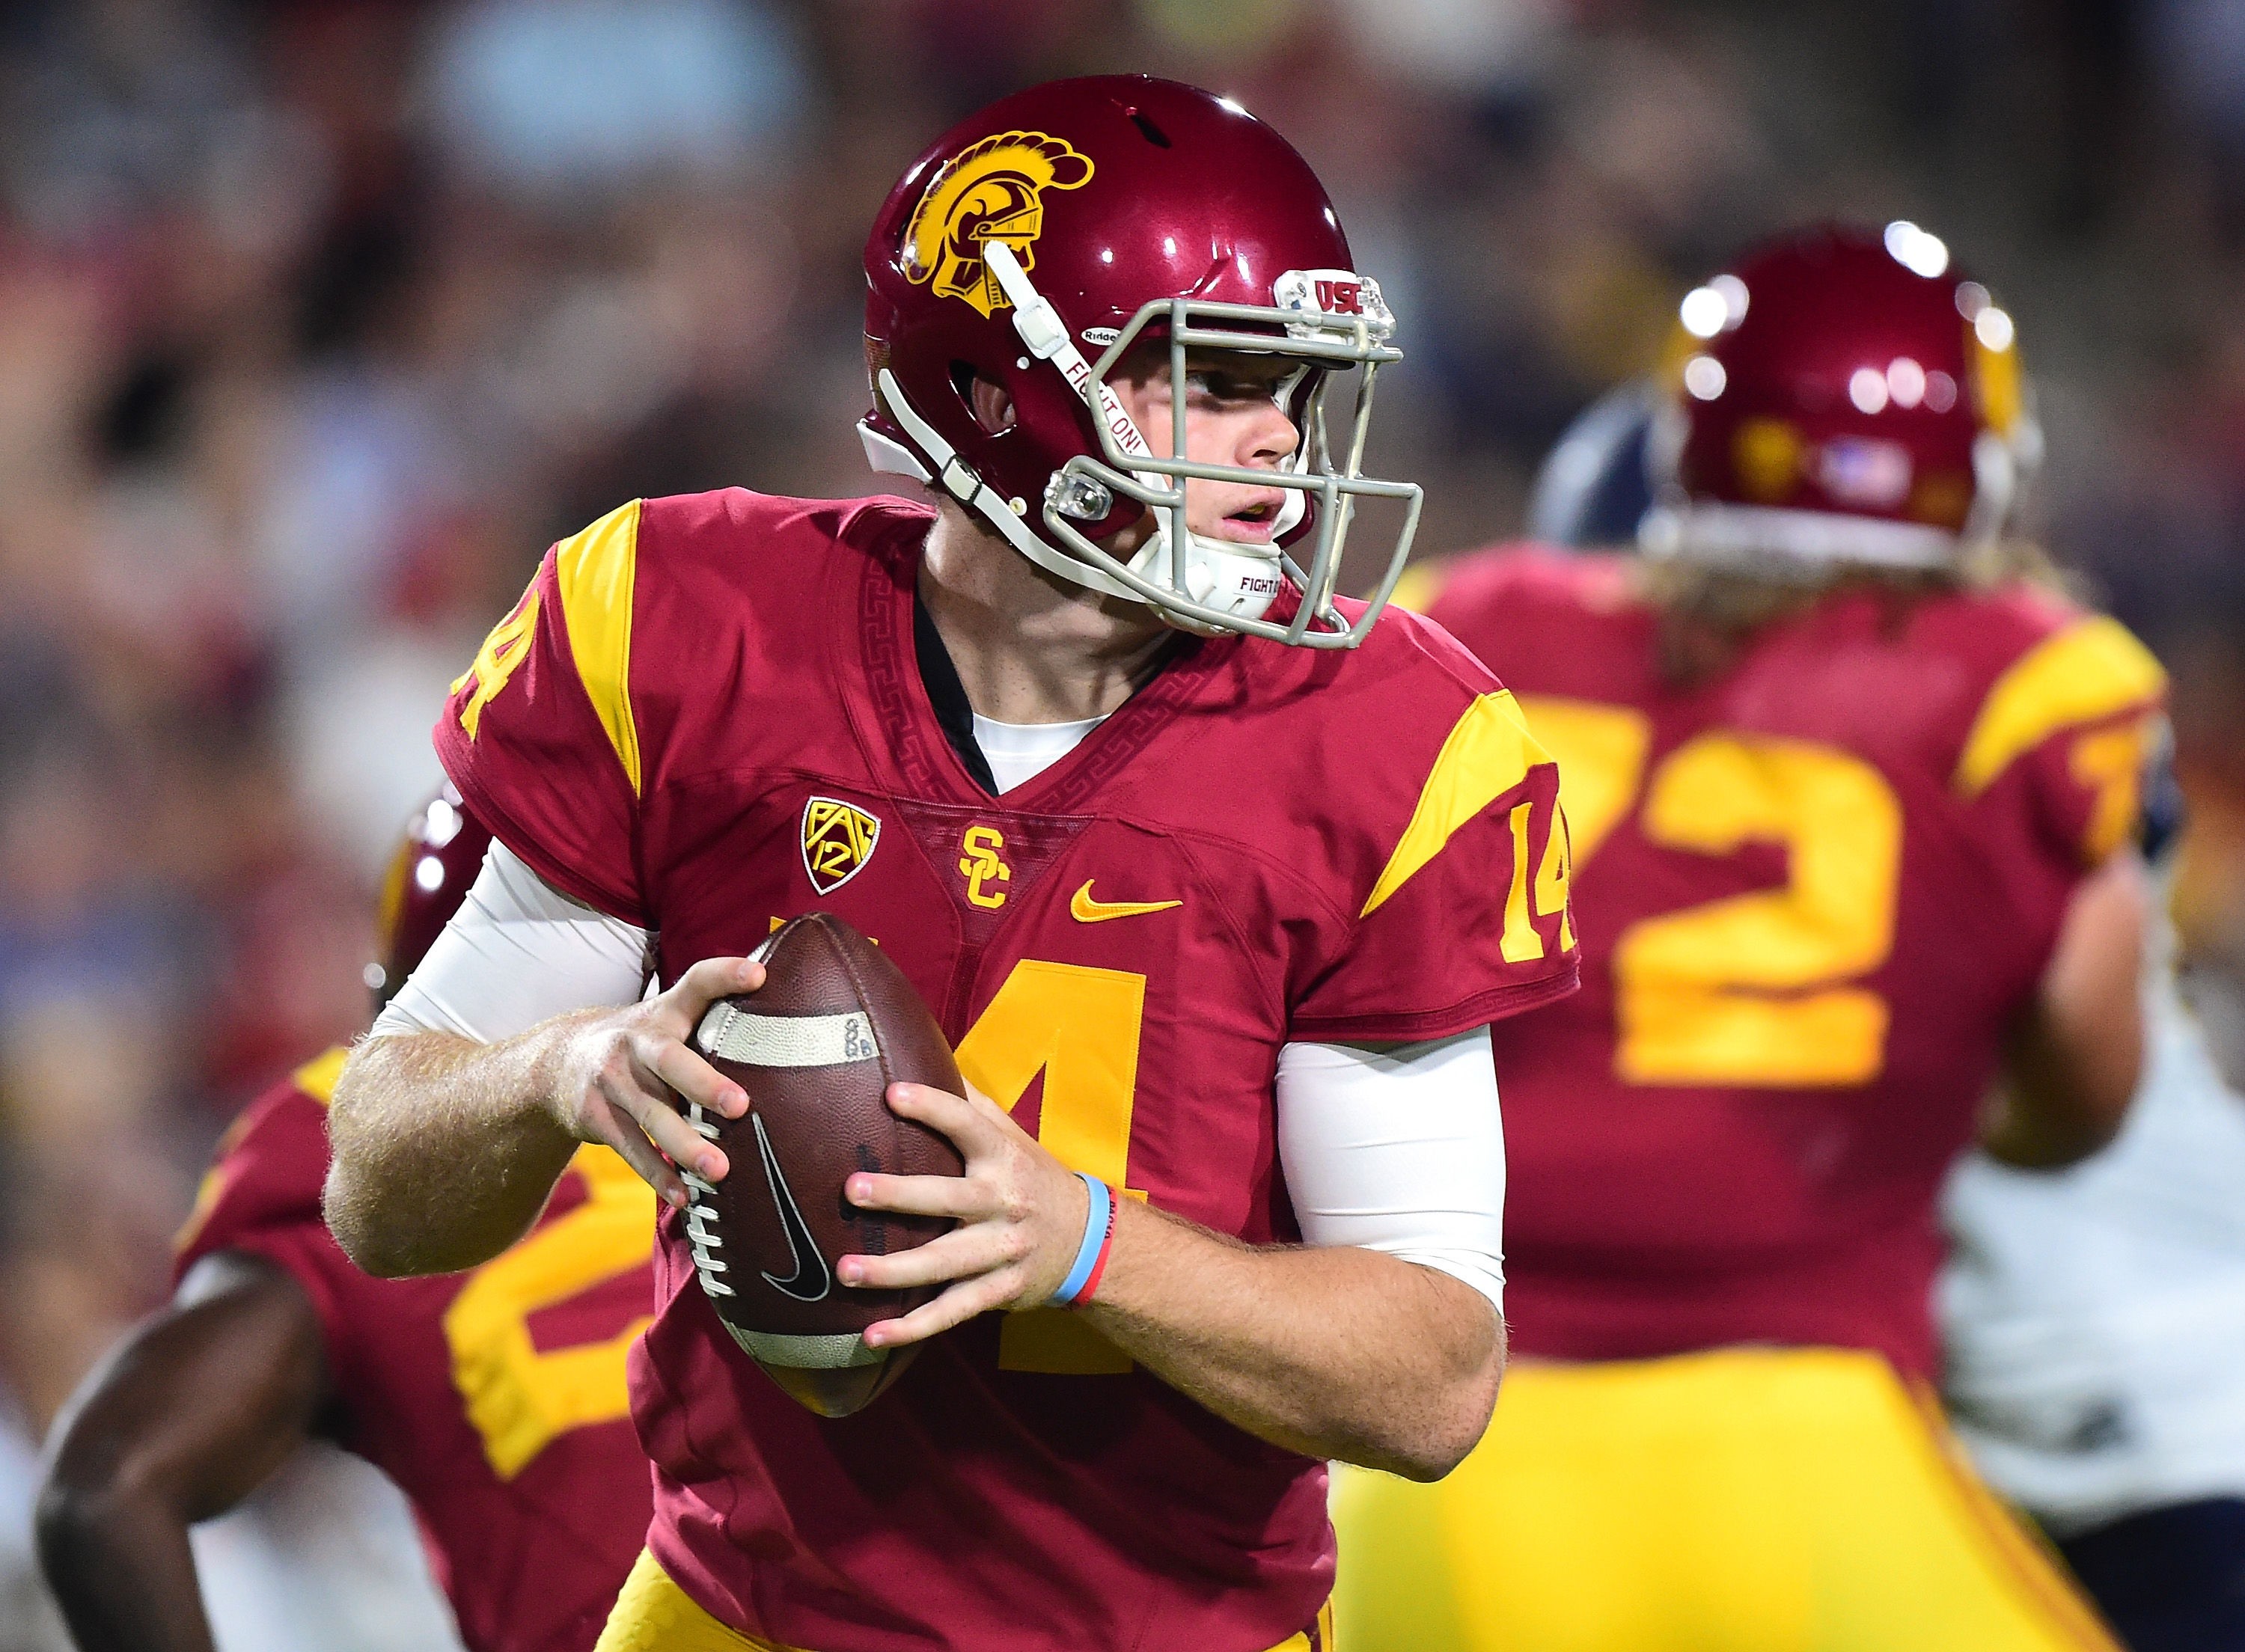 USC Football Over/under and stat predictions for the 2017 season